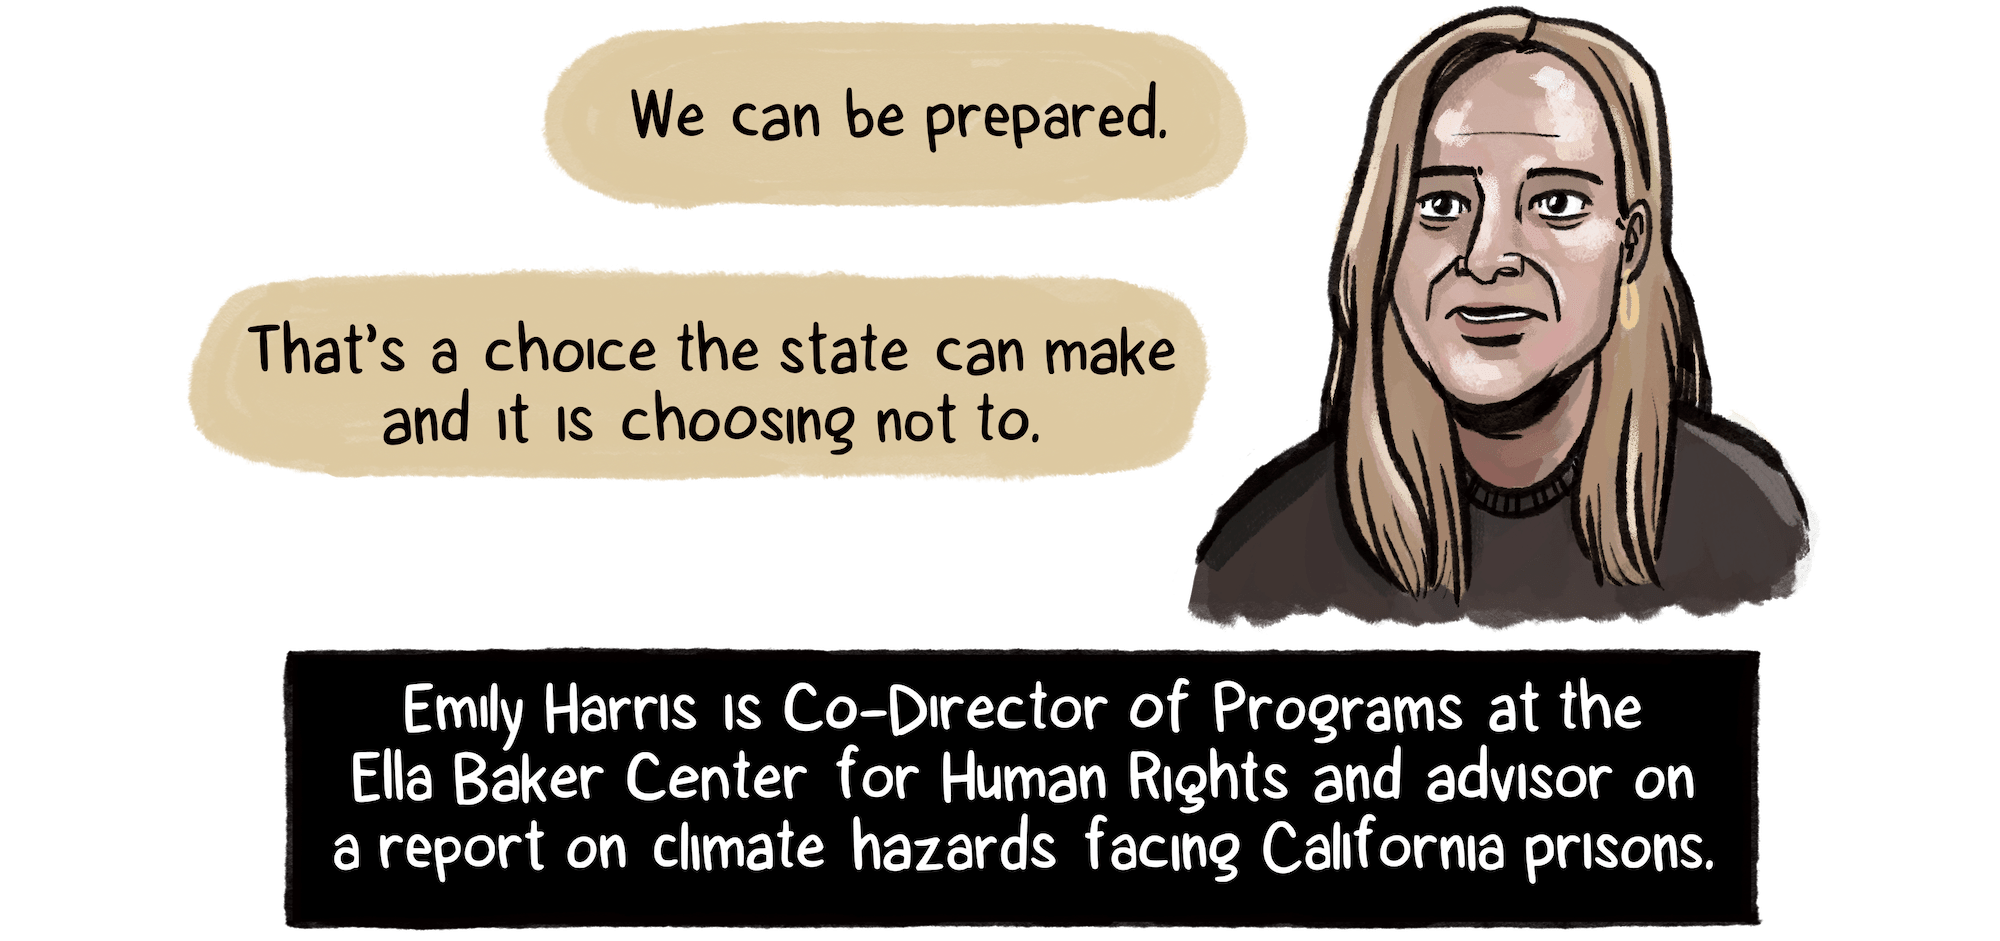 “It’s very clear that people in prison are distinctly vulnerable,” says Emily Harris, Co-Director of Programs at the Ella Baker Center for Human Rights. Harris, a woman with long blonde hair and light skin tone, is an advisor on a report about climate hazards facing California prisons.